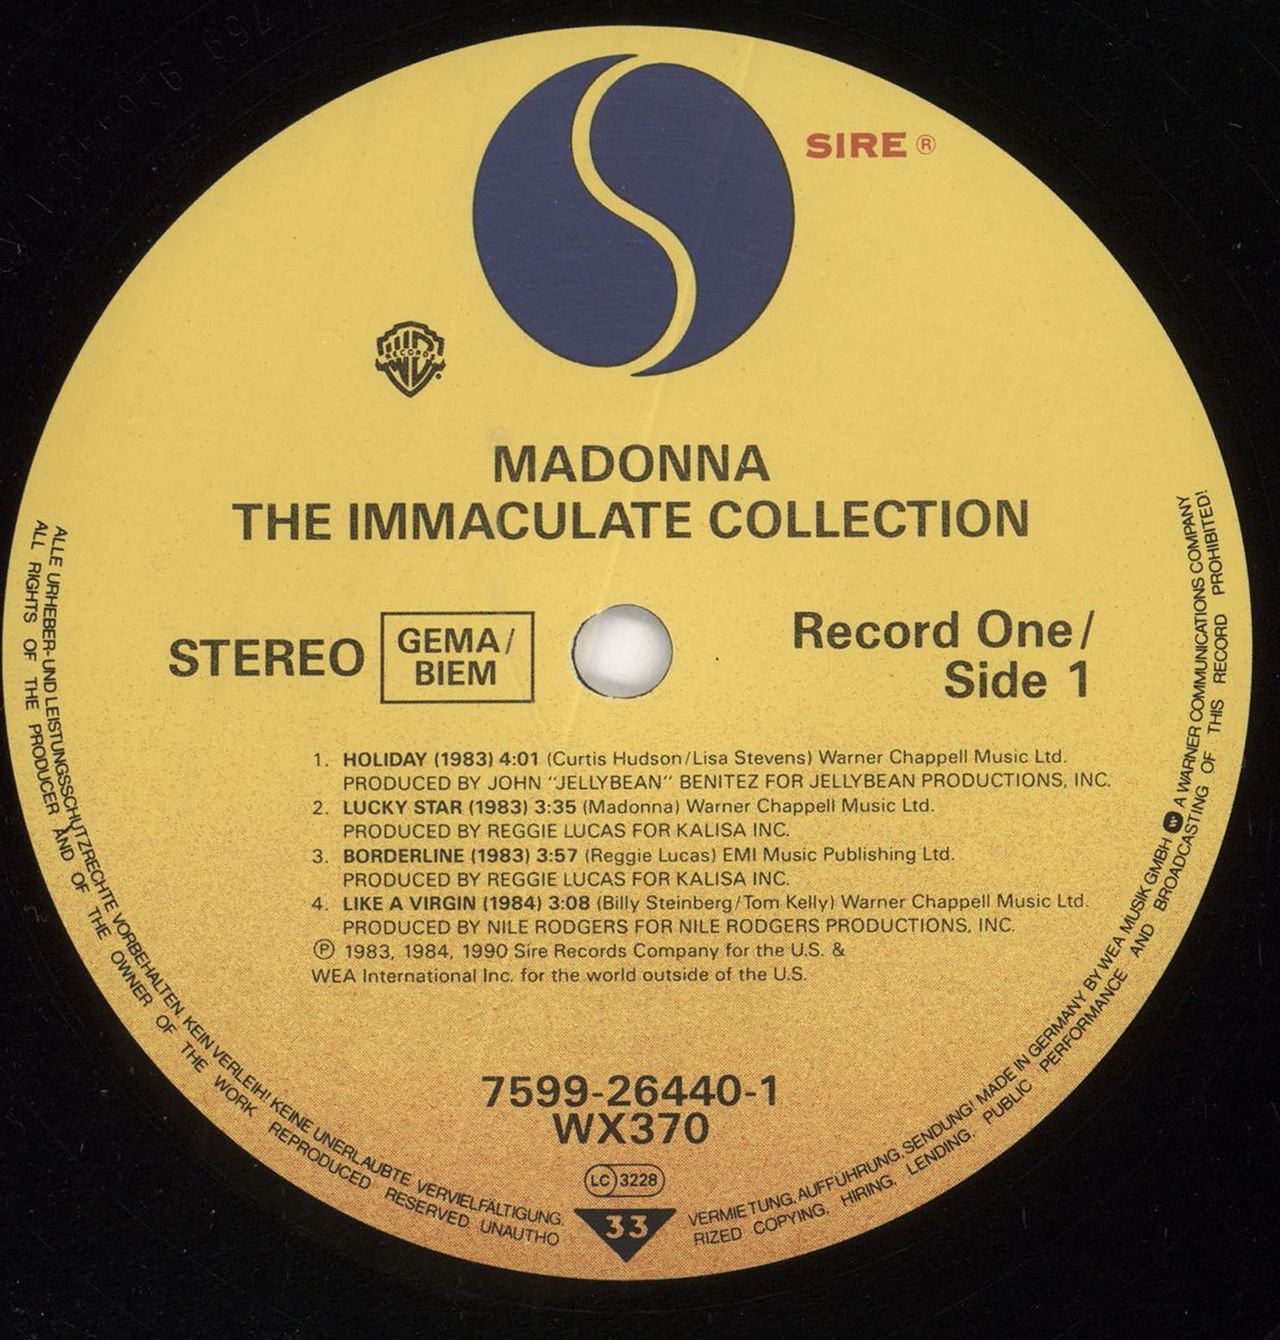 Madonna The Immaculate Collection - EX UK 2-LP vinyl record set (Double LP Album) MAD2LTH424577